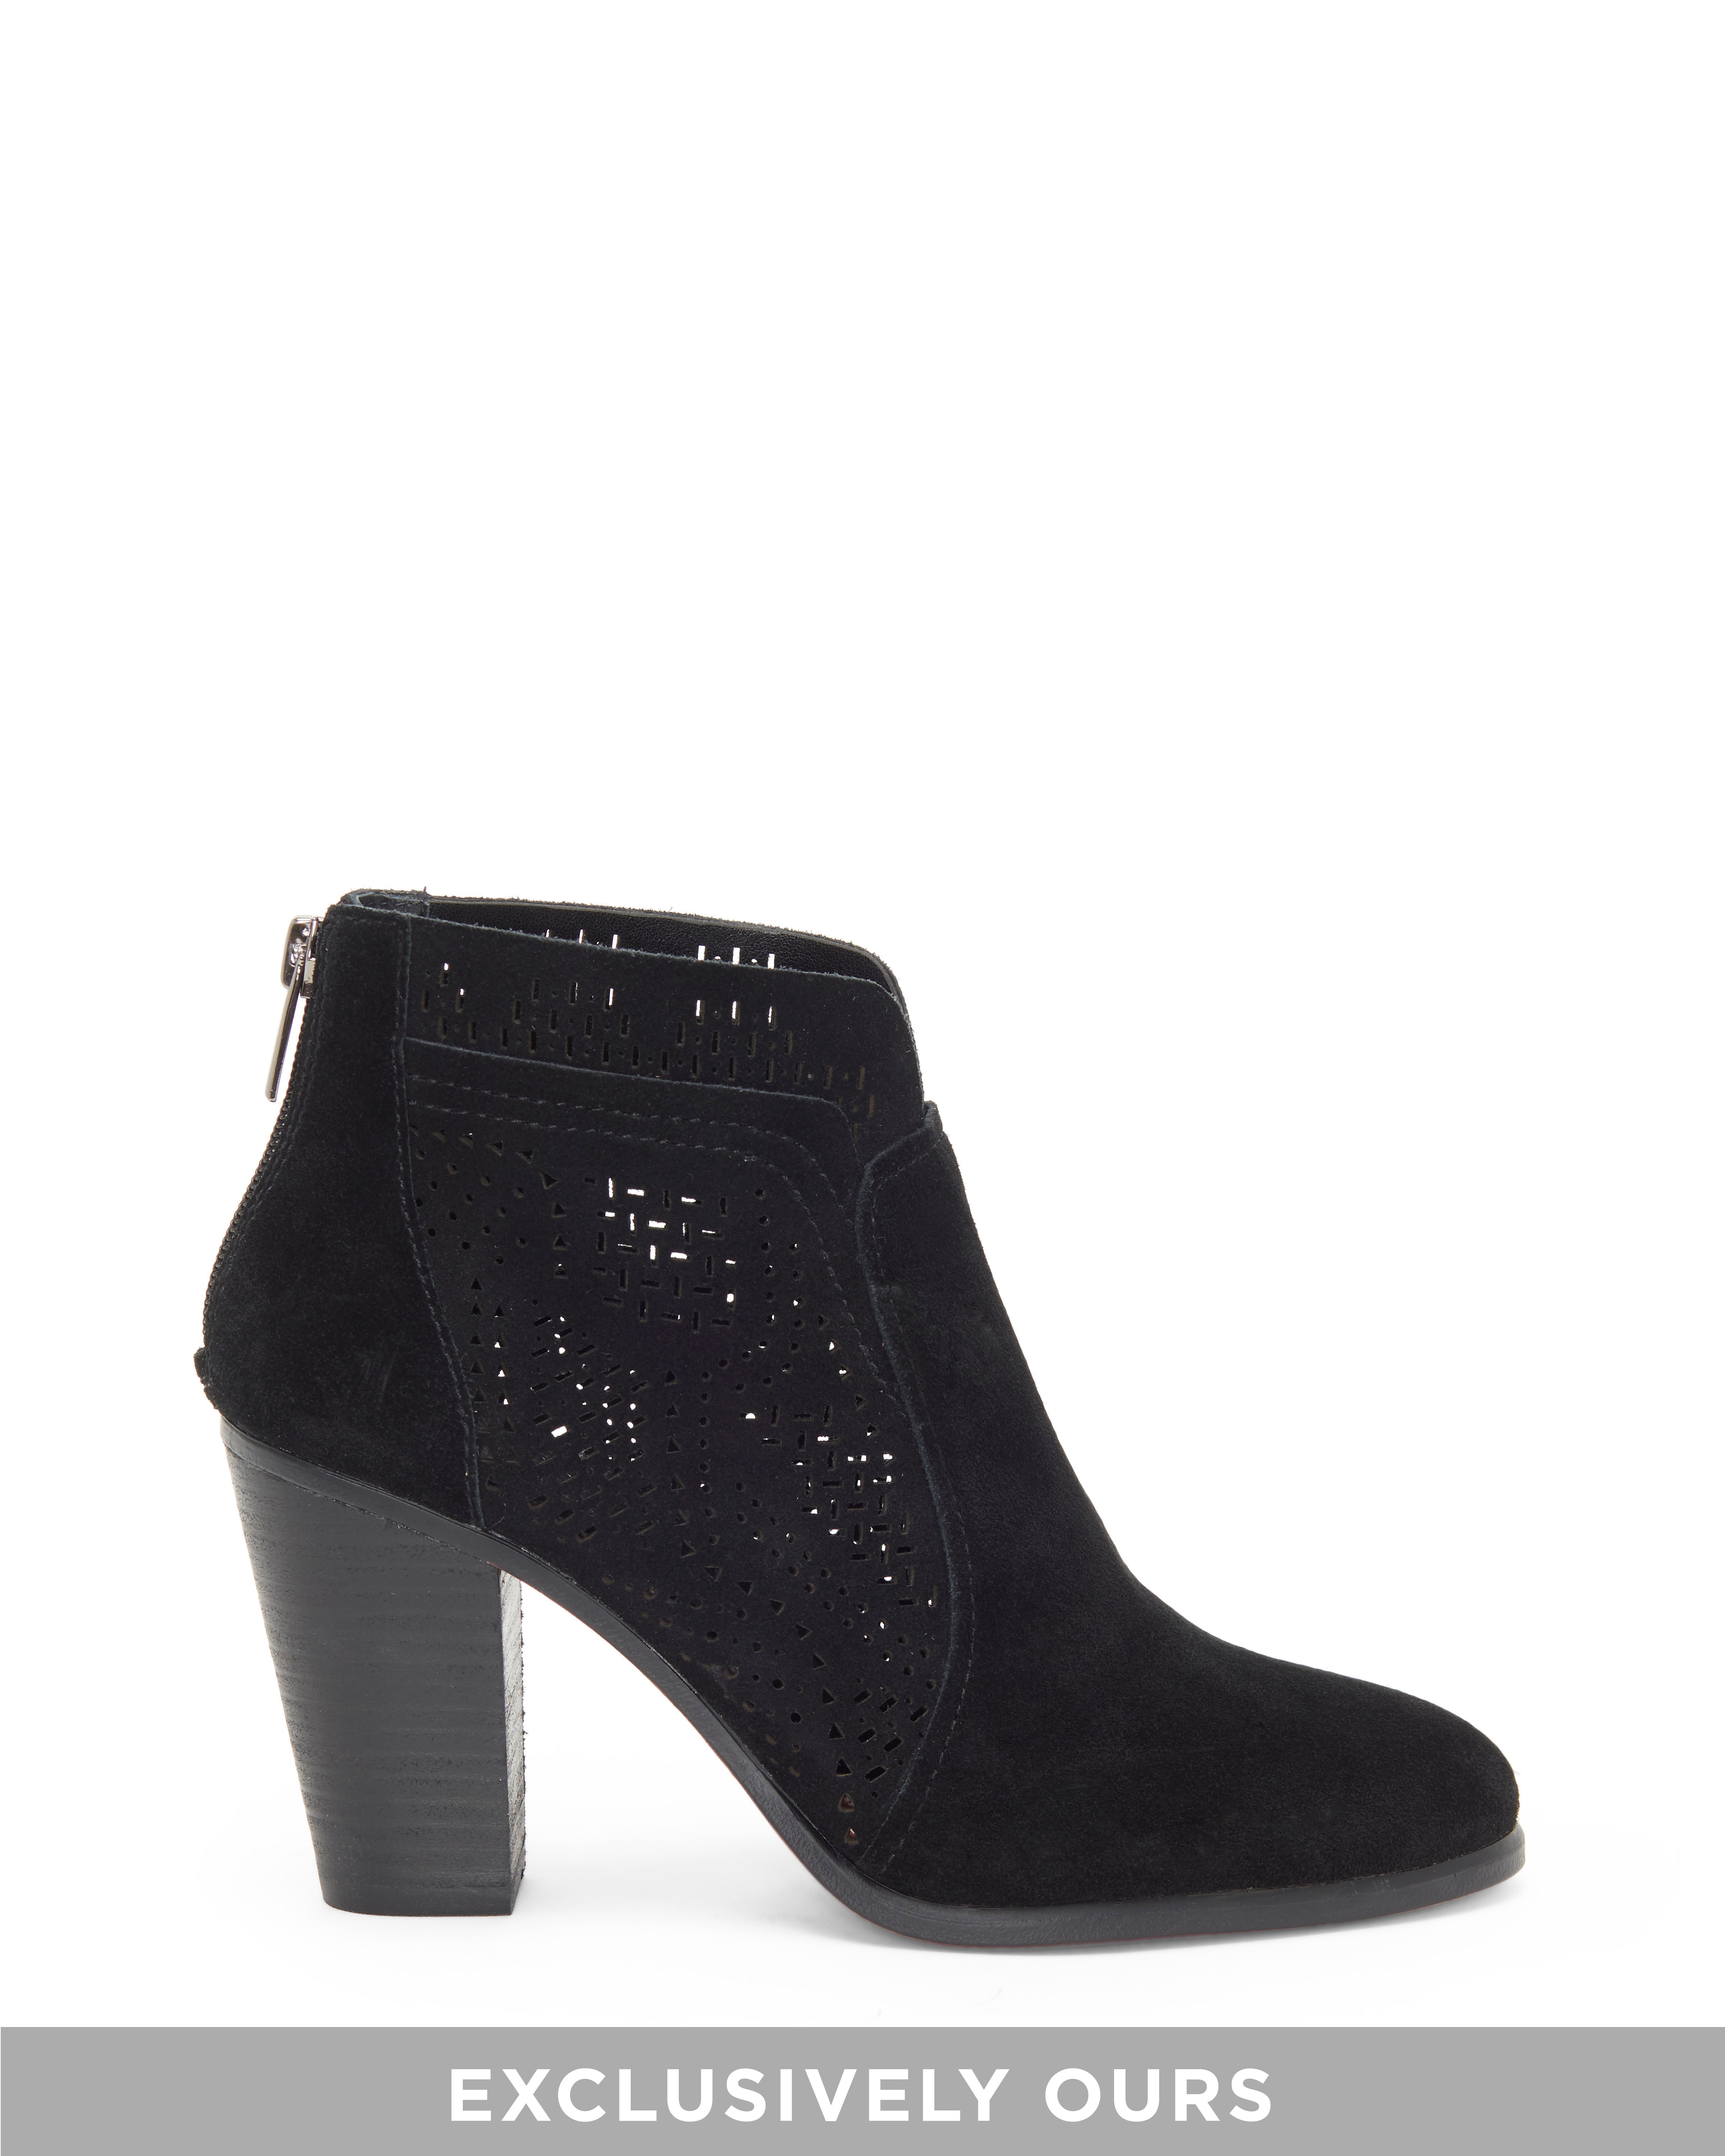 Vince Camuto Women's Clorieea Perforated Bootie Shoes